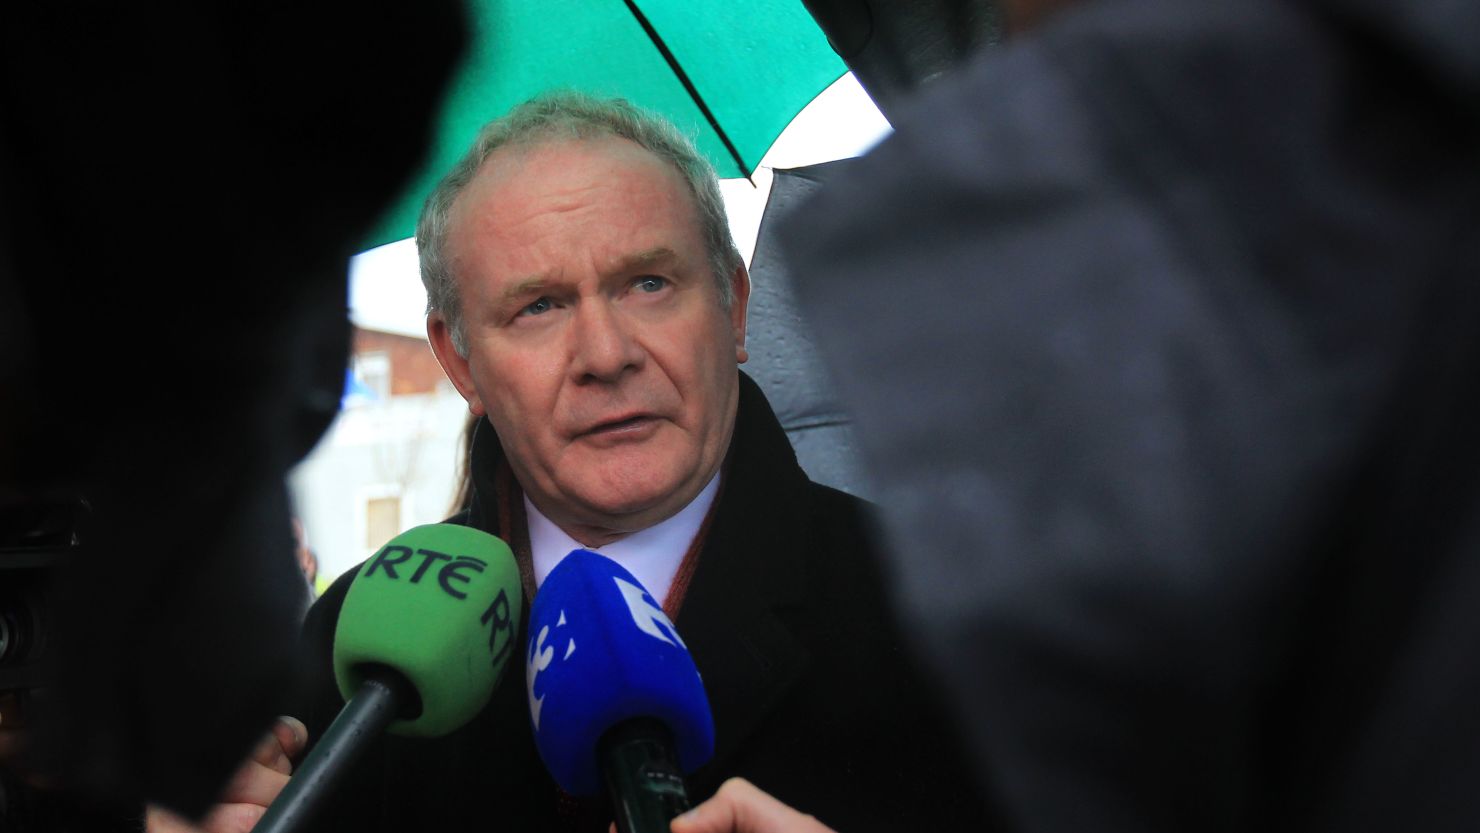 Martin McGuinness quit as Northern Ireland's Deputy First Minister a week ago.